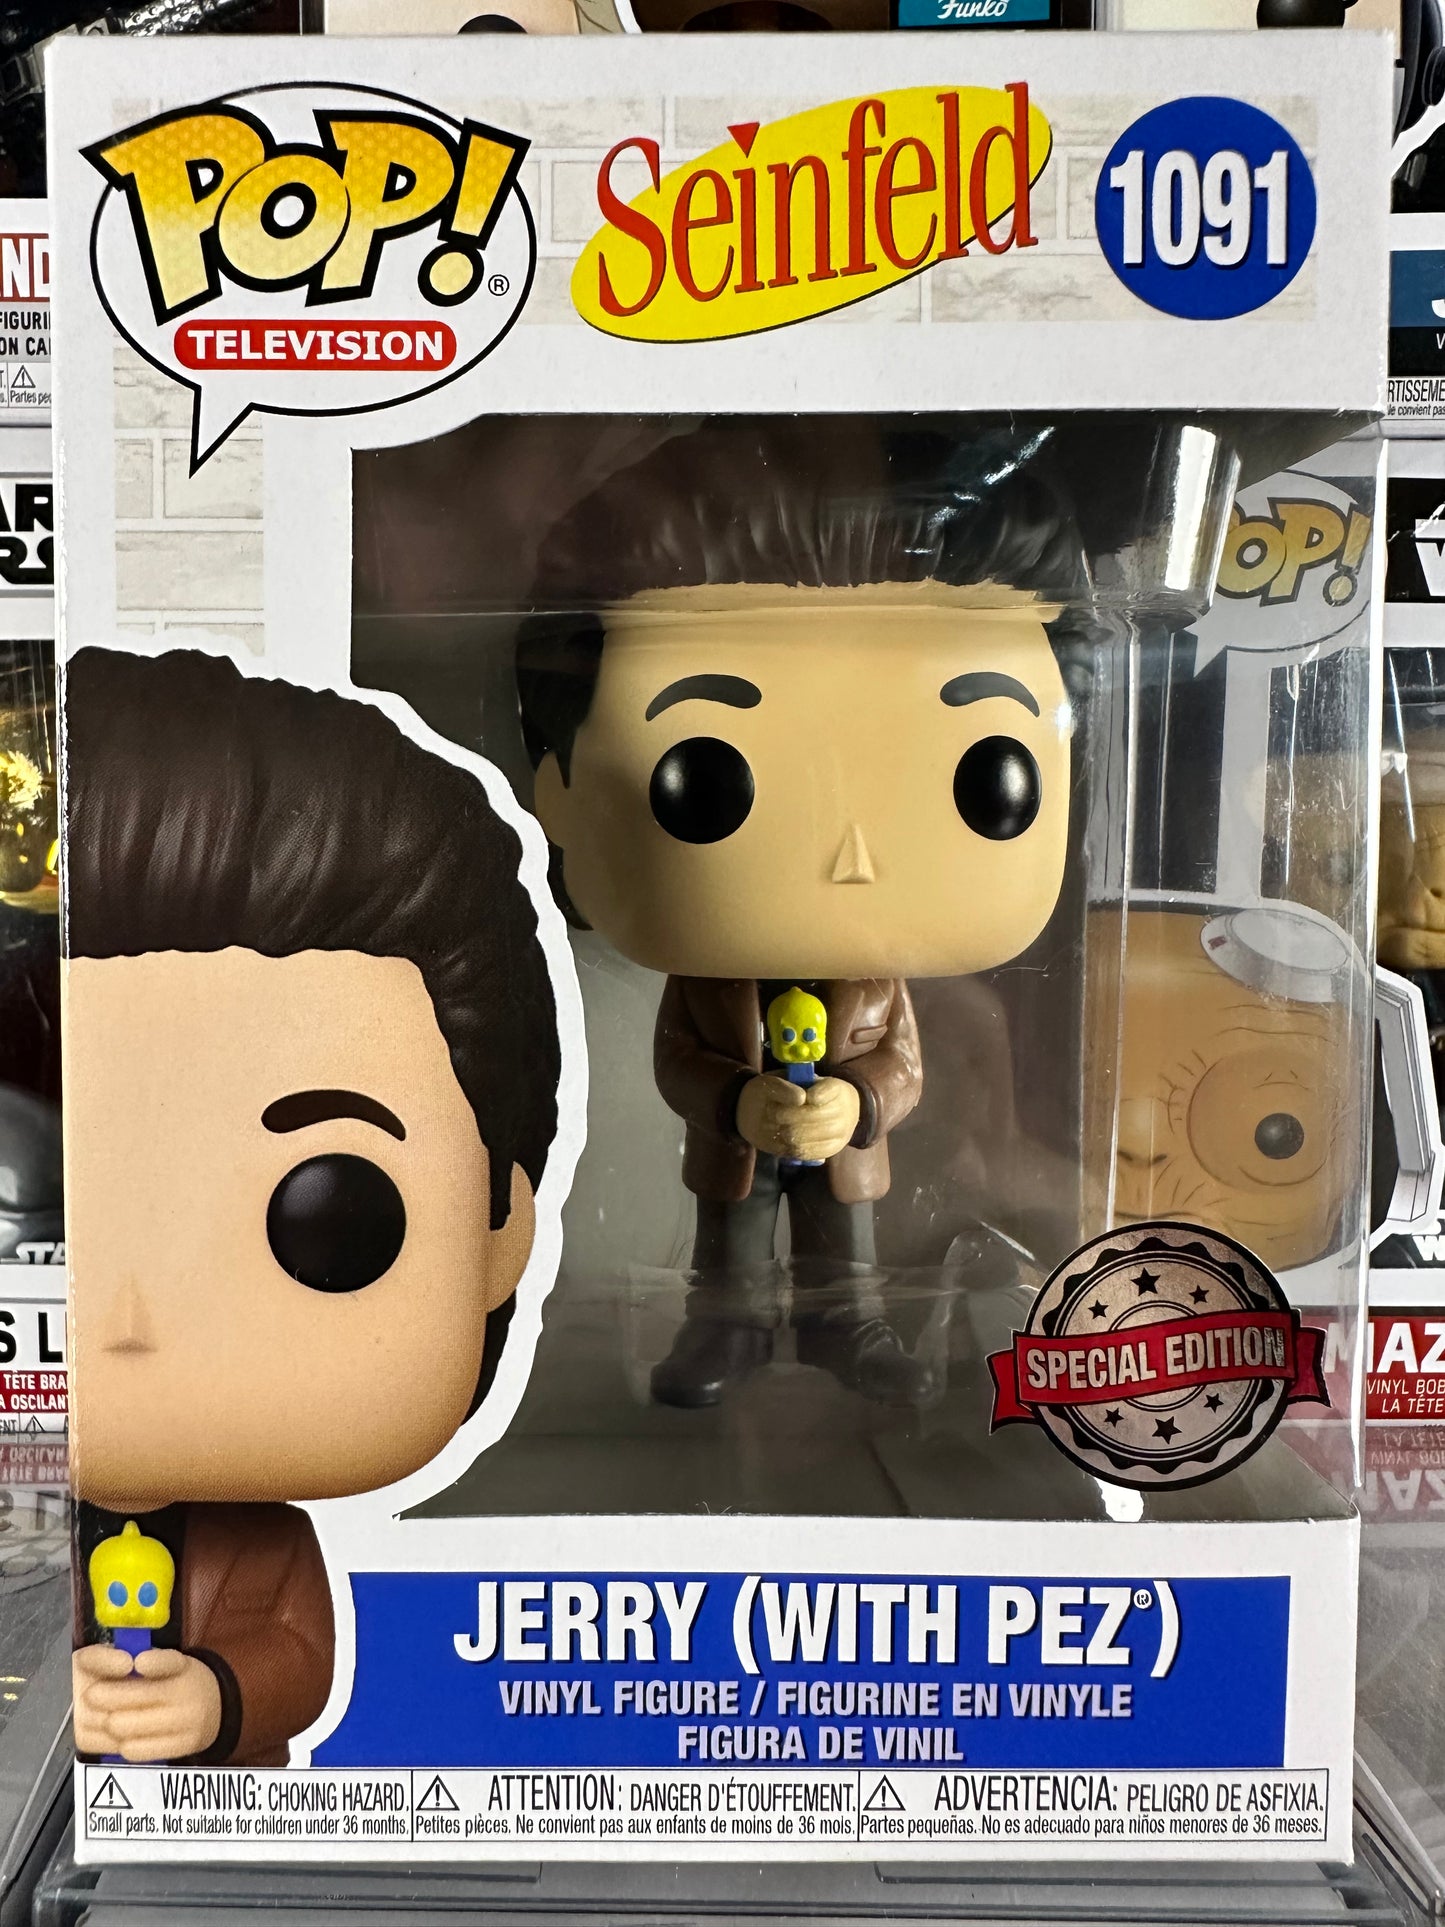 Seinfeld - Jerry (With Pez) (1091)